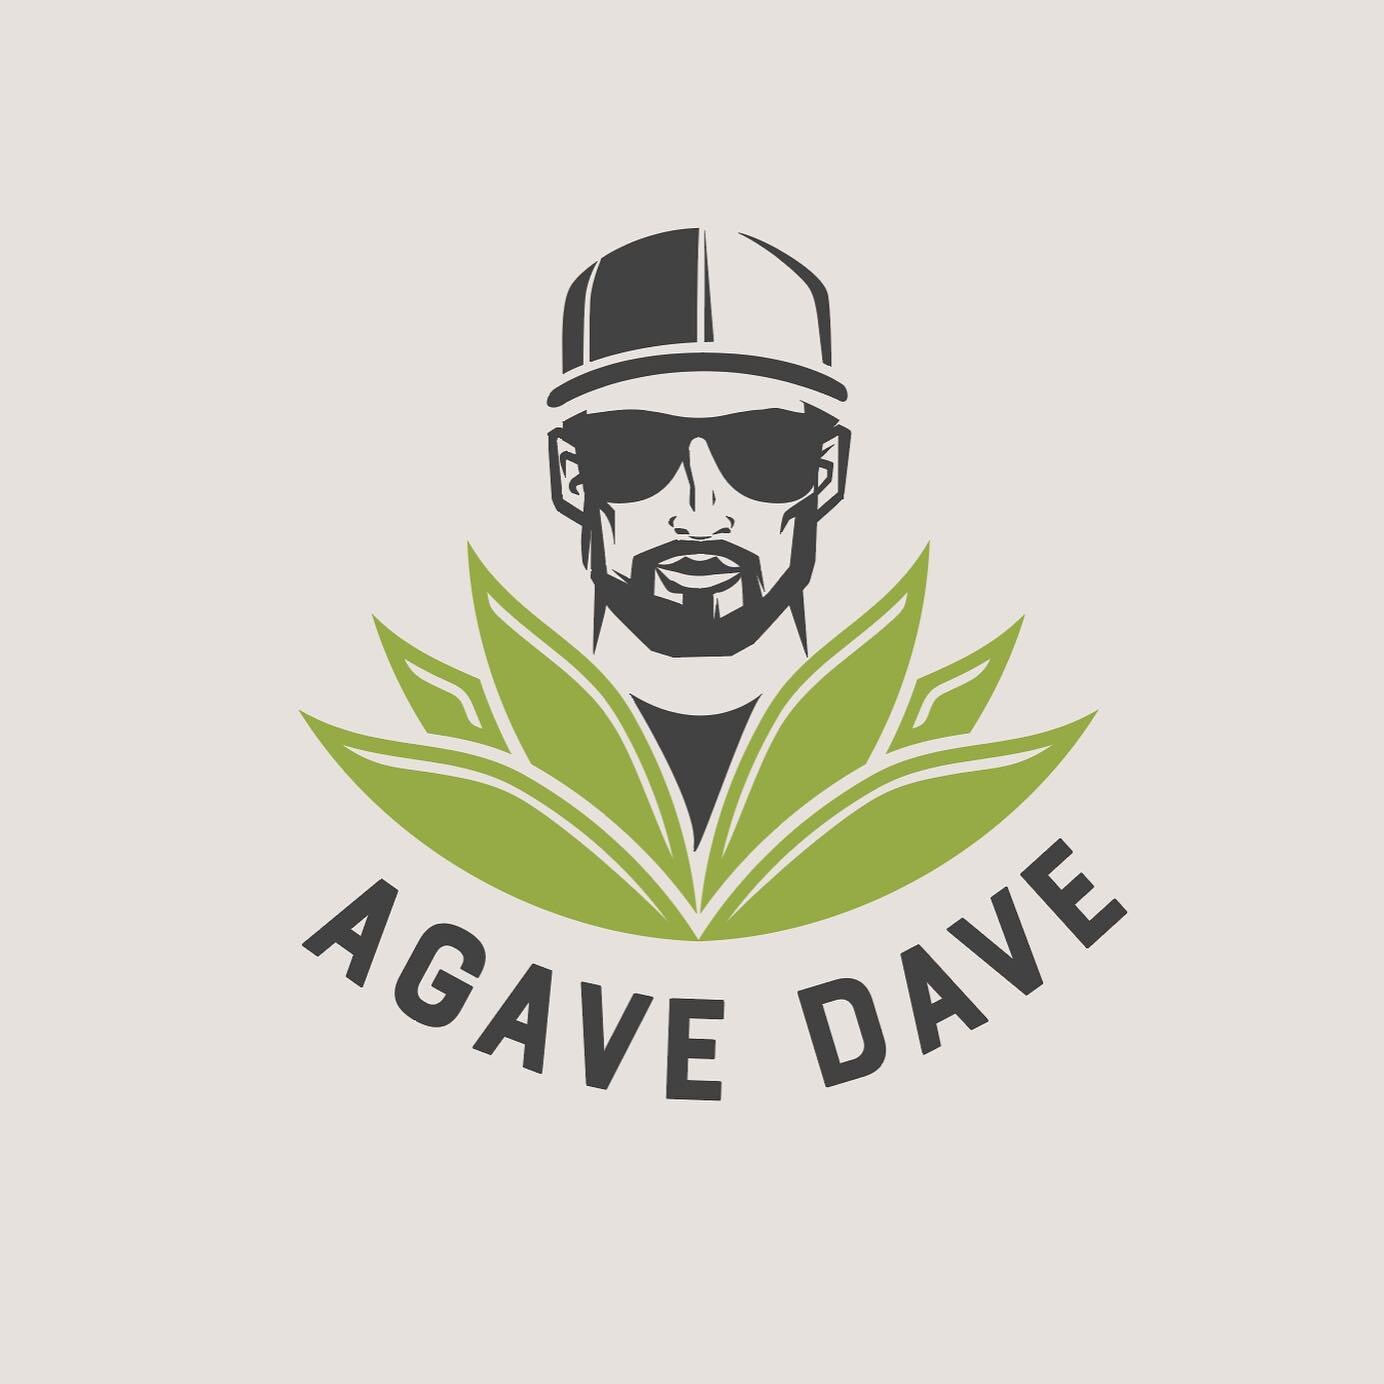 We love a fun creative challenge, but most of all we want to make sure your brand represents you. We think we nailed it in this one! @agavedave132 #newcastlelogodesign